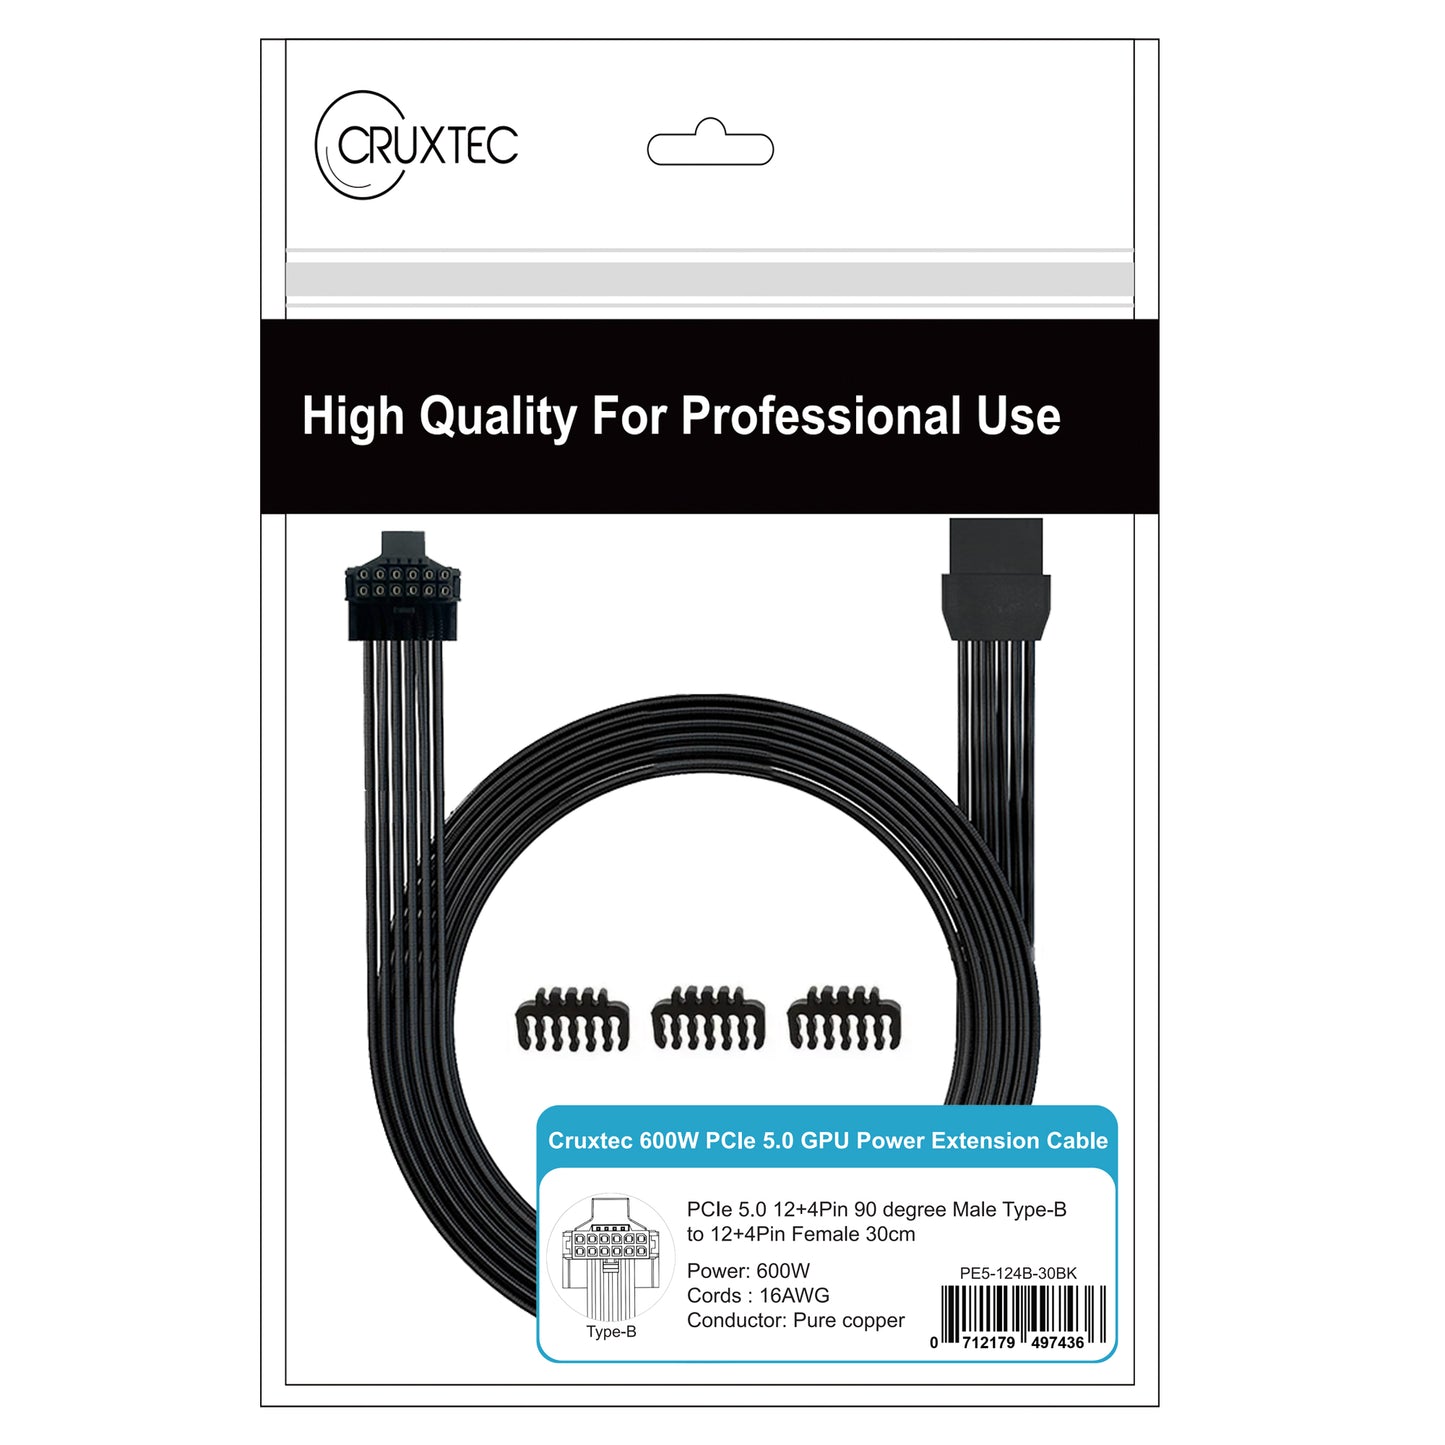 Cruxtec 600W PCle 5.0 GPU Power Extension Cable